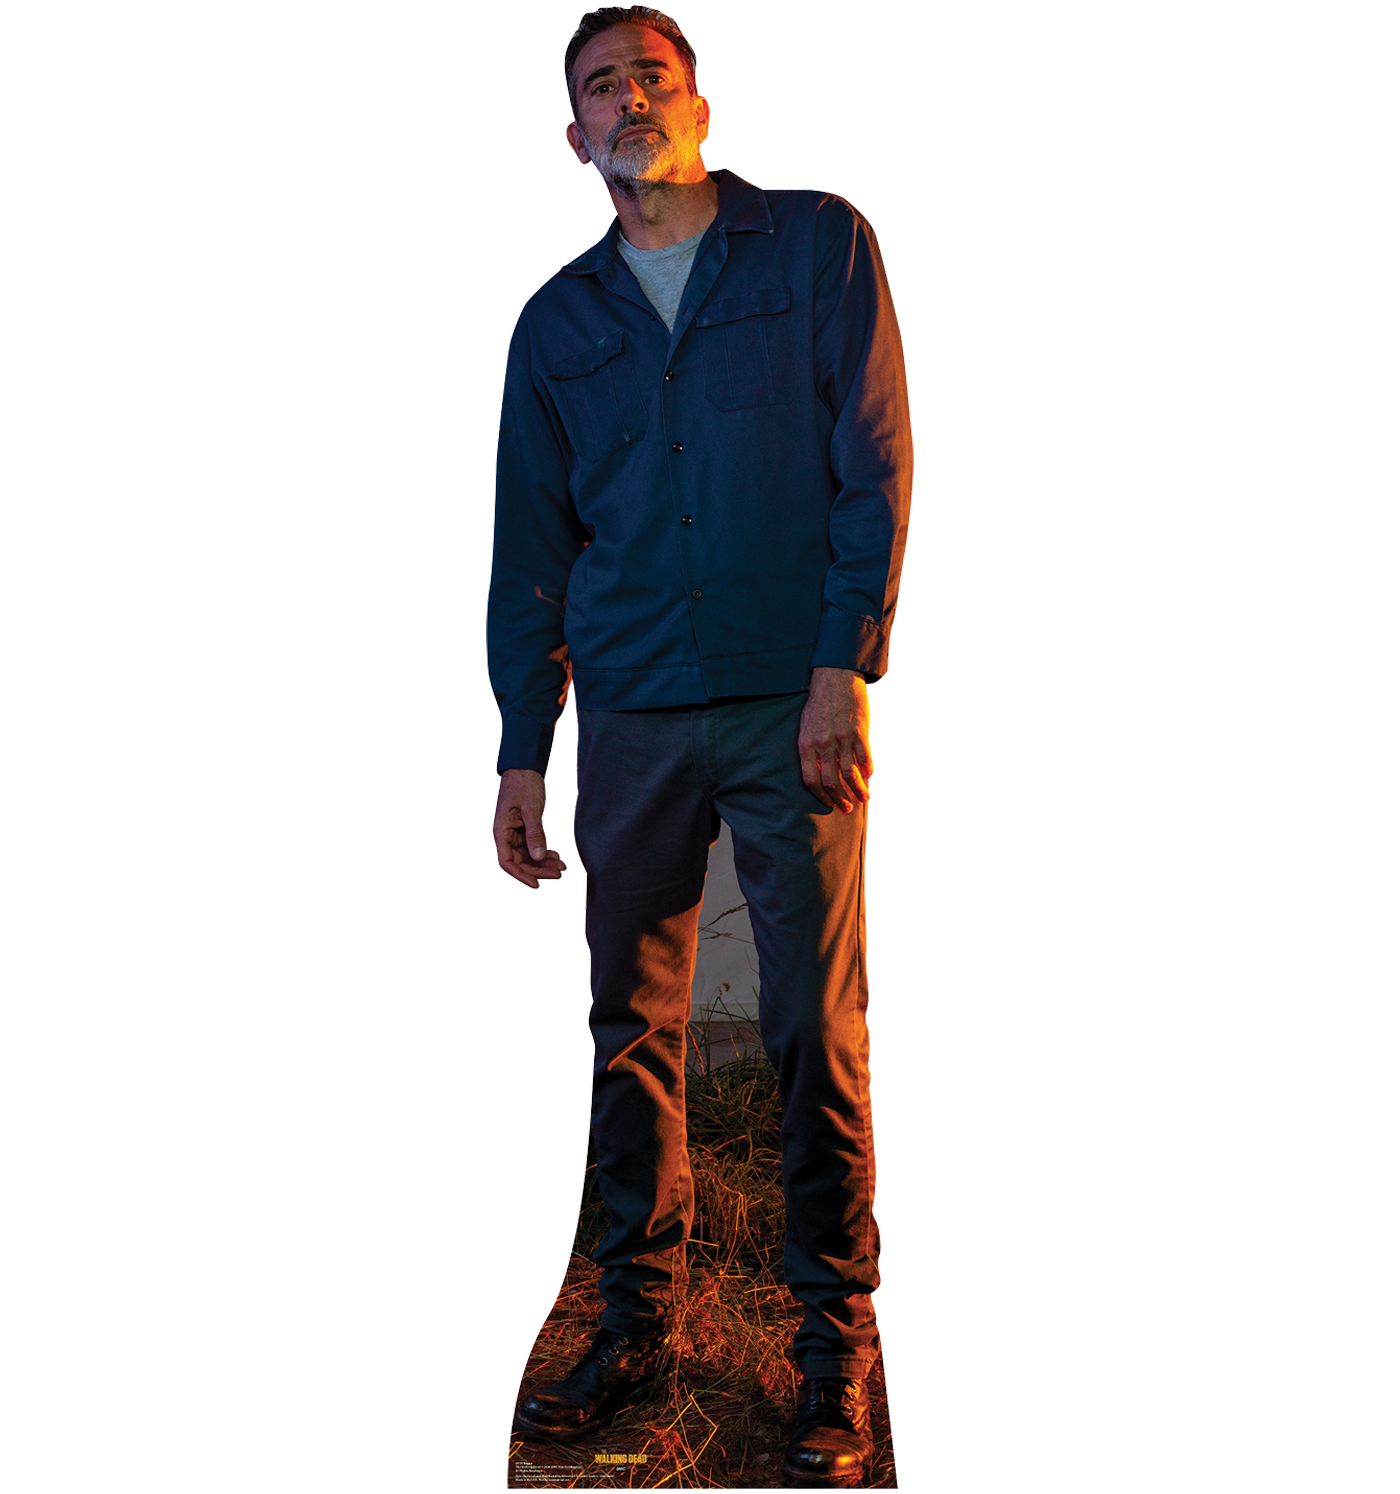 The Walking Dead Negan and Lucille Cardboard Cut Out Standee